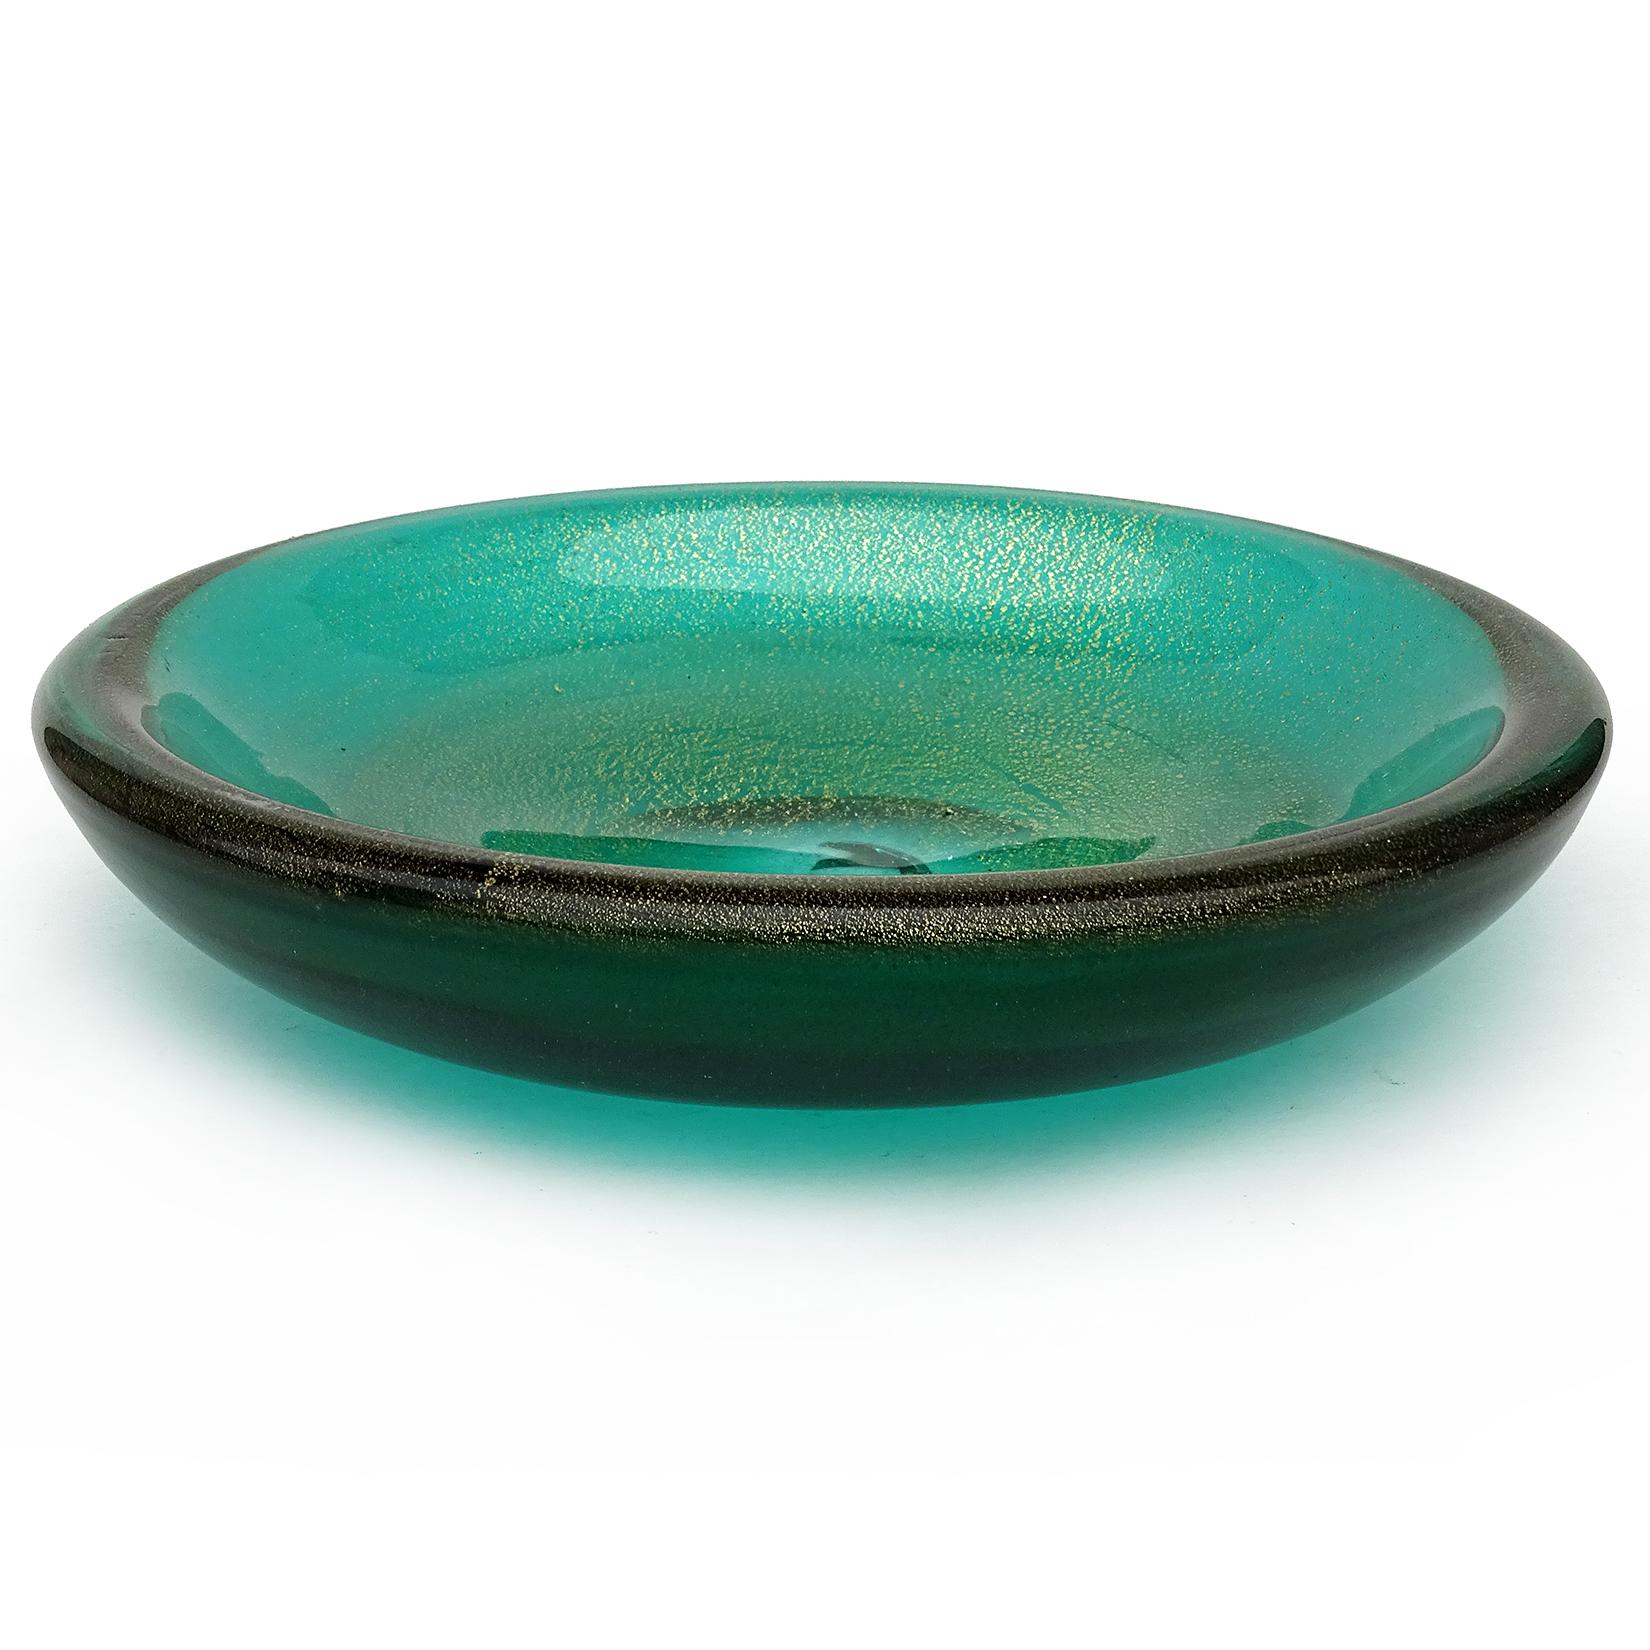 Beautiful vintage Murano hand blown Sommerso green and gold flecks Italian art glass circular bowl. Attributed to designer Archimede Seguso. Profusely covered in gold leaf. Would make a great display piece on any table. Use it as a catchall, or